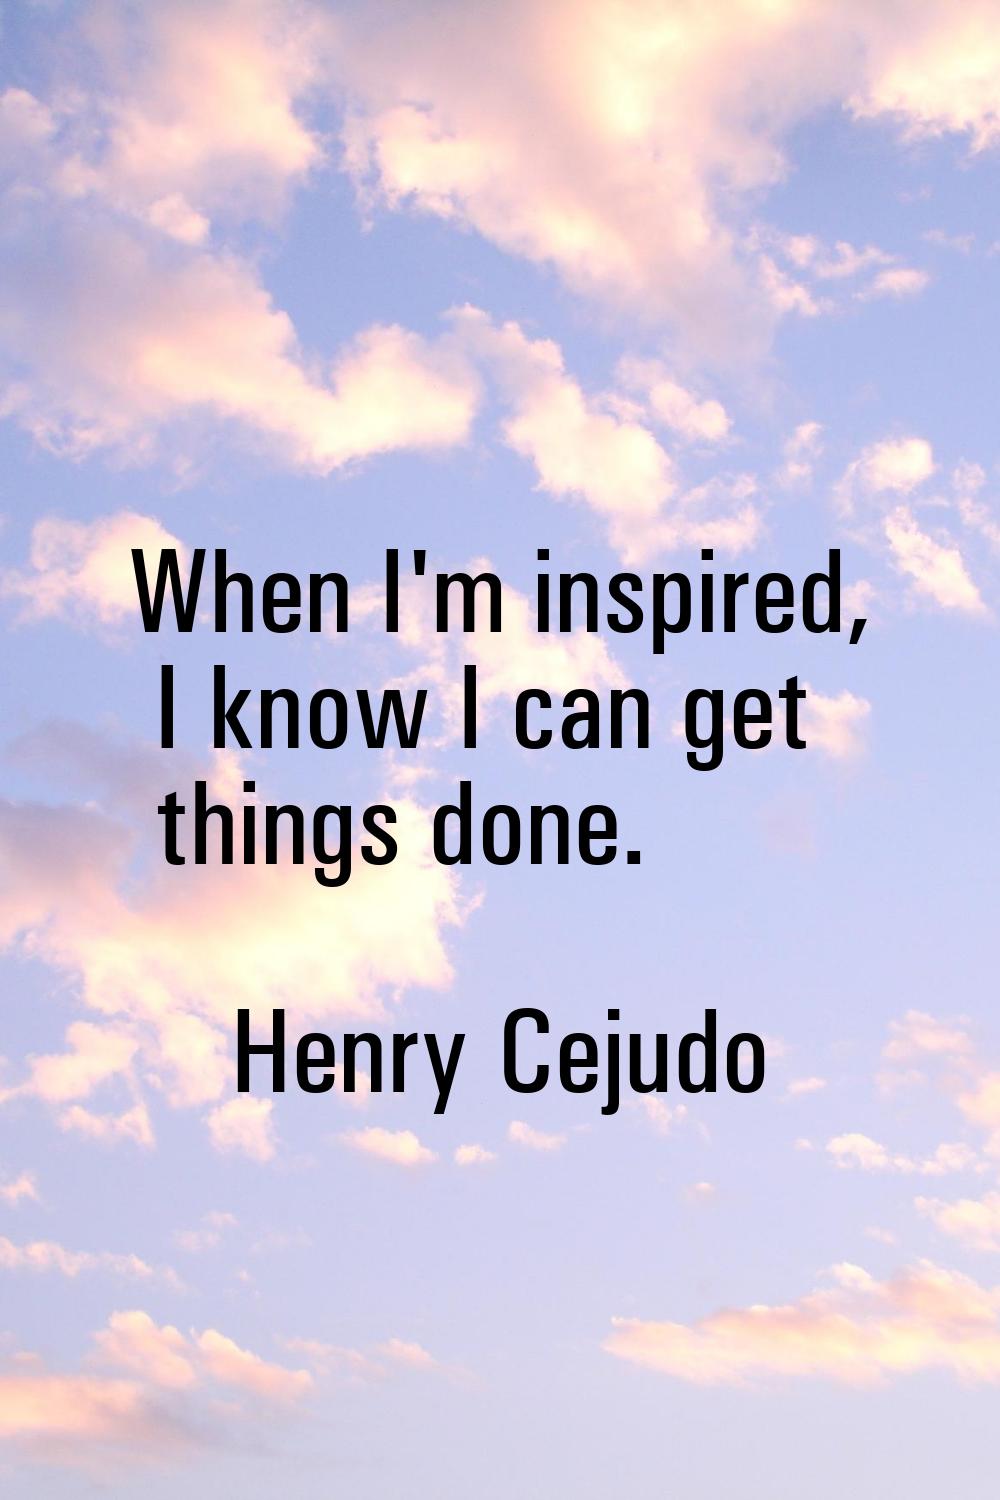 When I'm inspired, I know I can get things done.